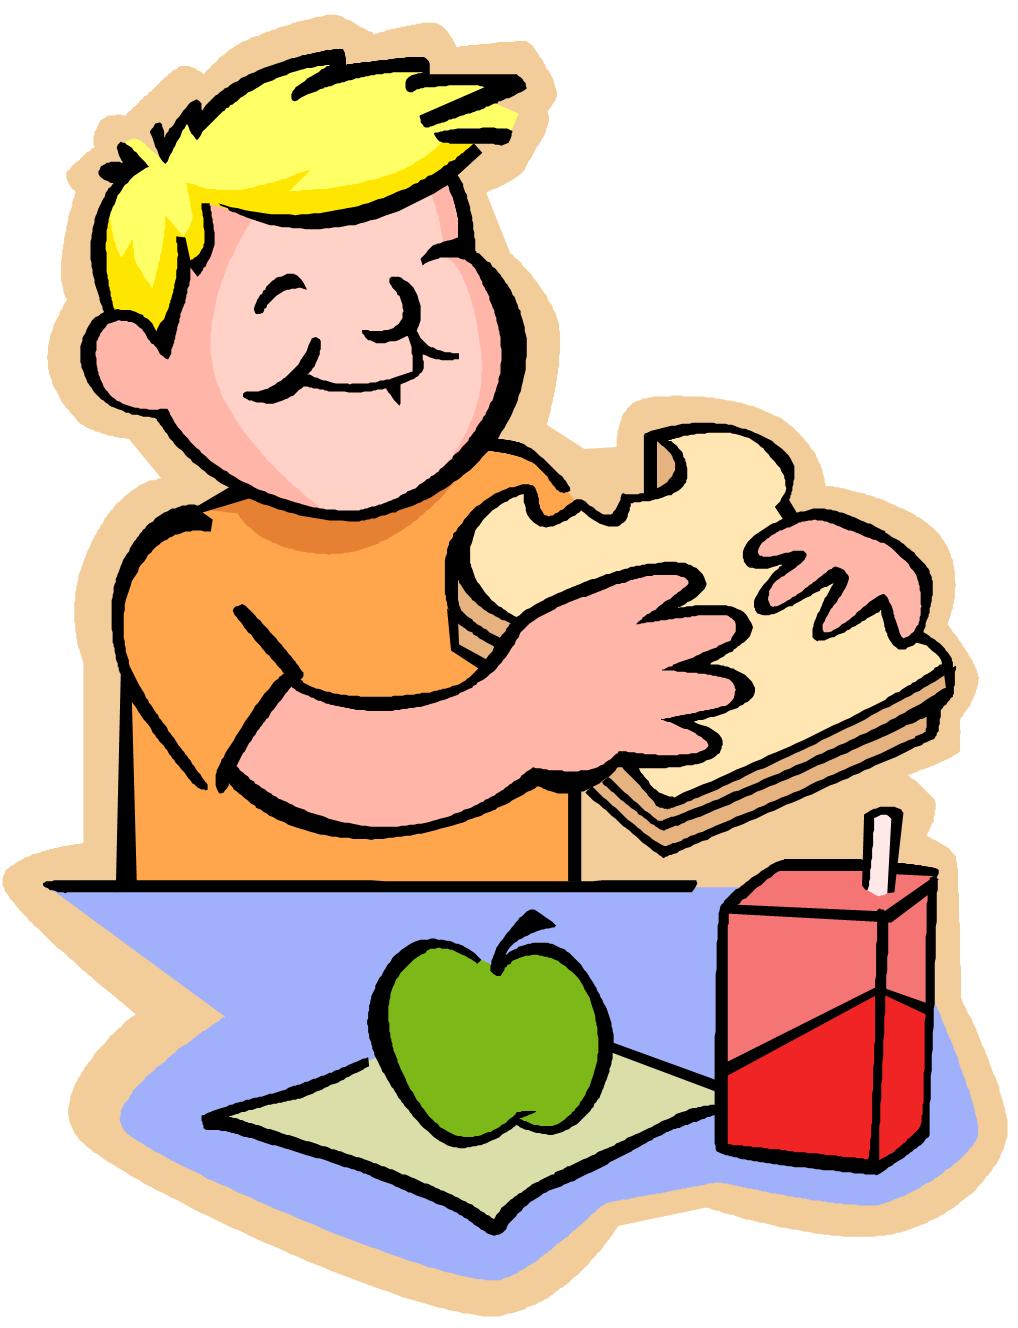 Lunch kids clipart free images